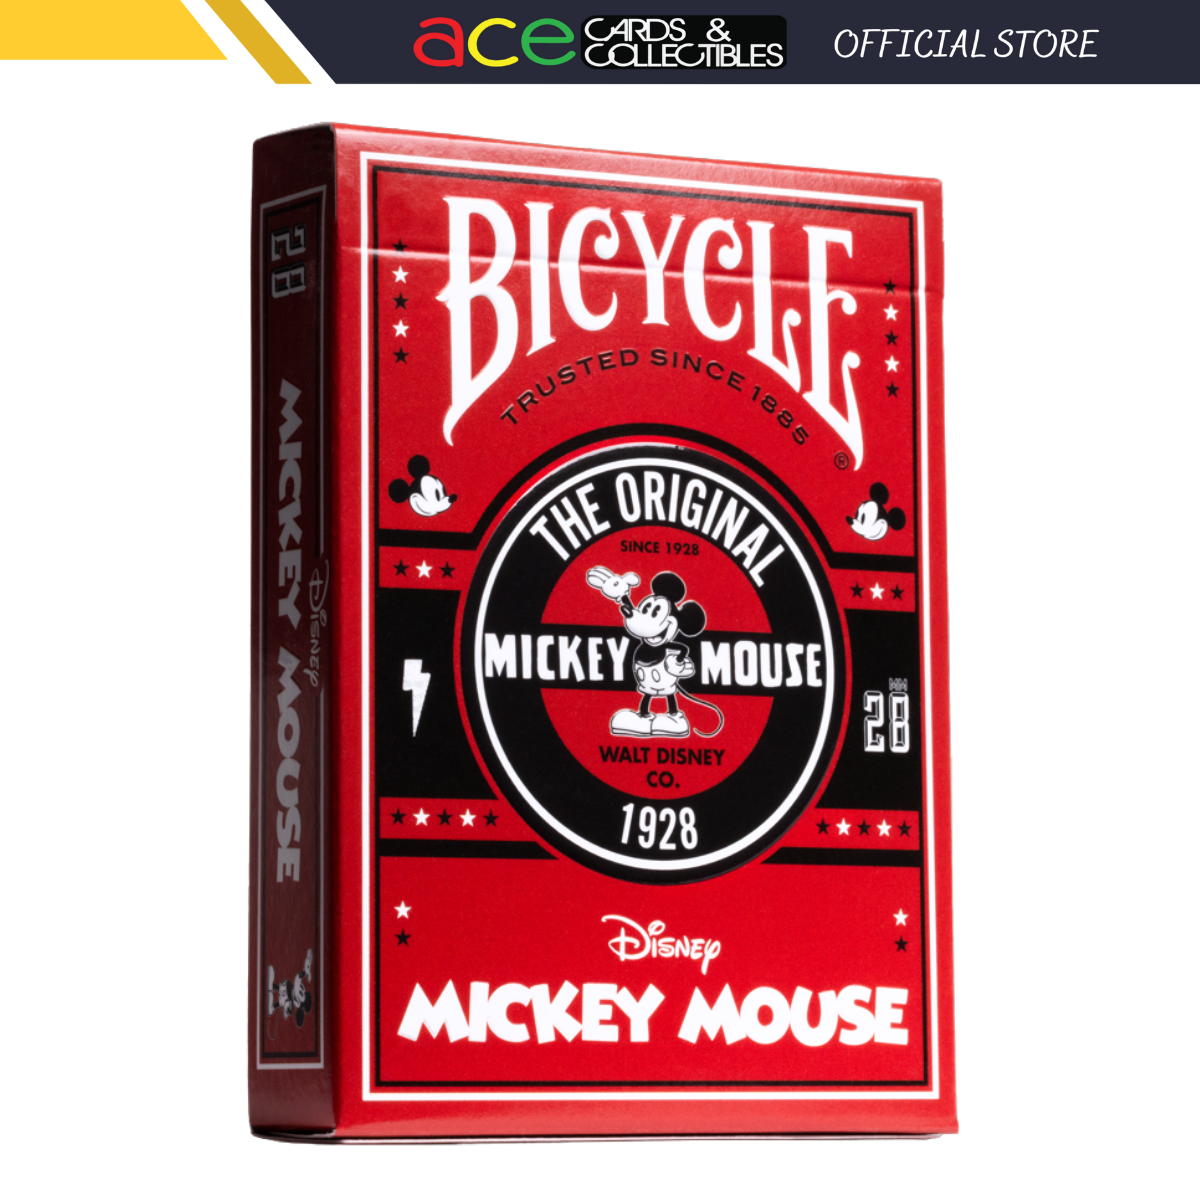 Bicycle Disney Classic Mickey Playing Cards-United States Playing Cards Company-Ace Cards &amp; Collectibles